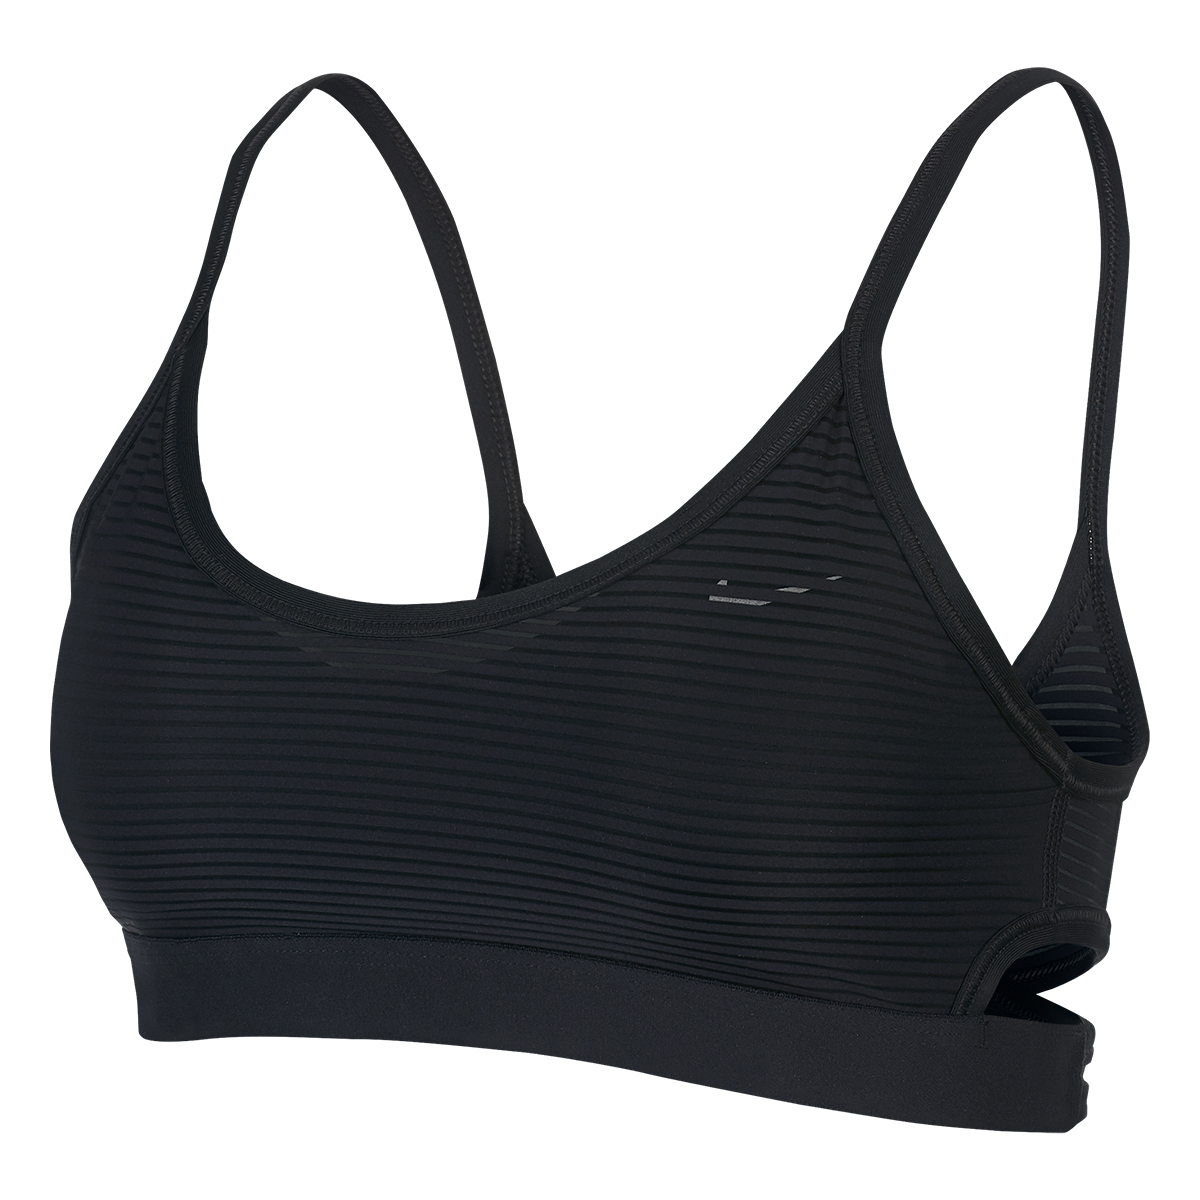 Nike Indy Bra, , large image number null